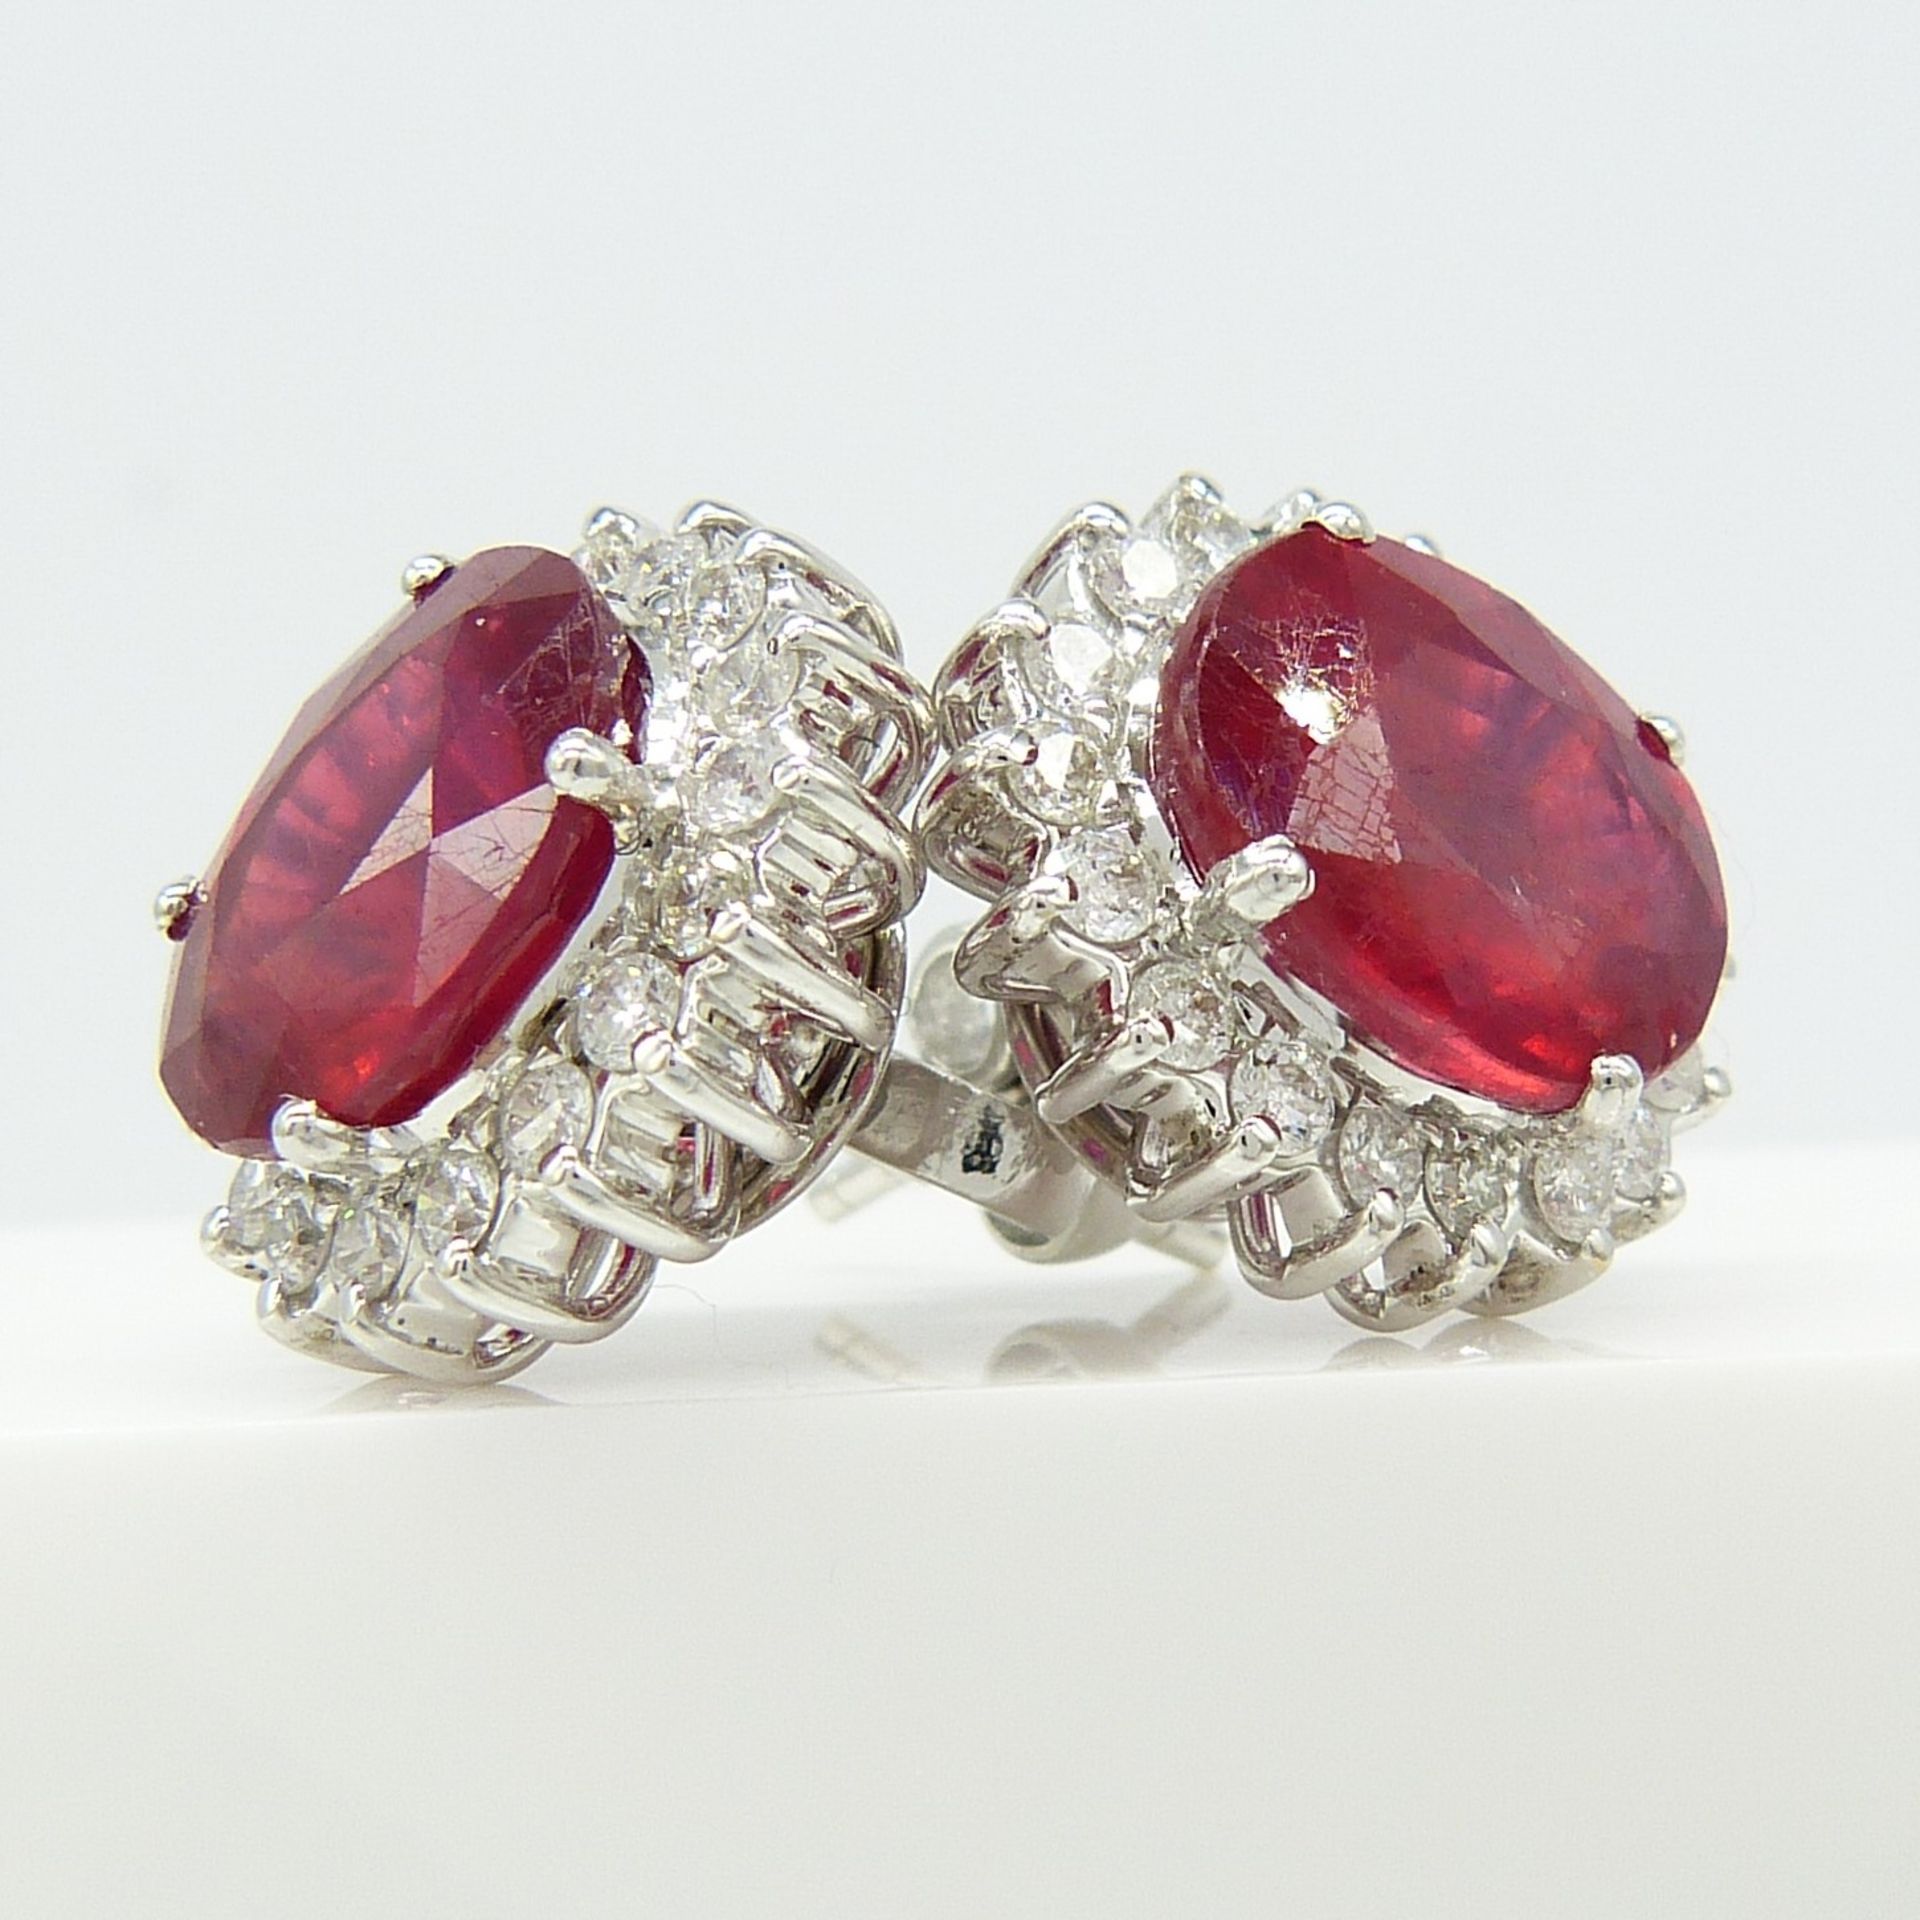 7.50 Carat Ruby and Diamond Cluster Earrings In 18ct White Gold, Boxed - Image 6 of 6